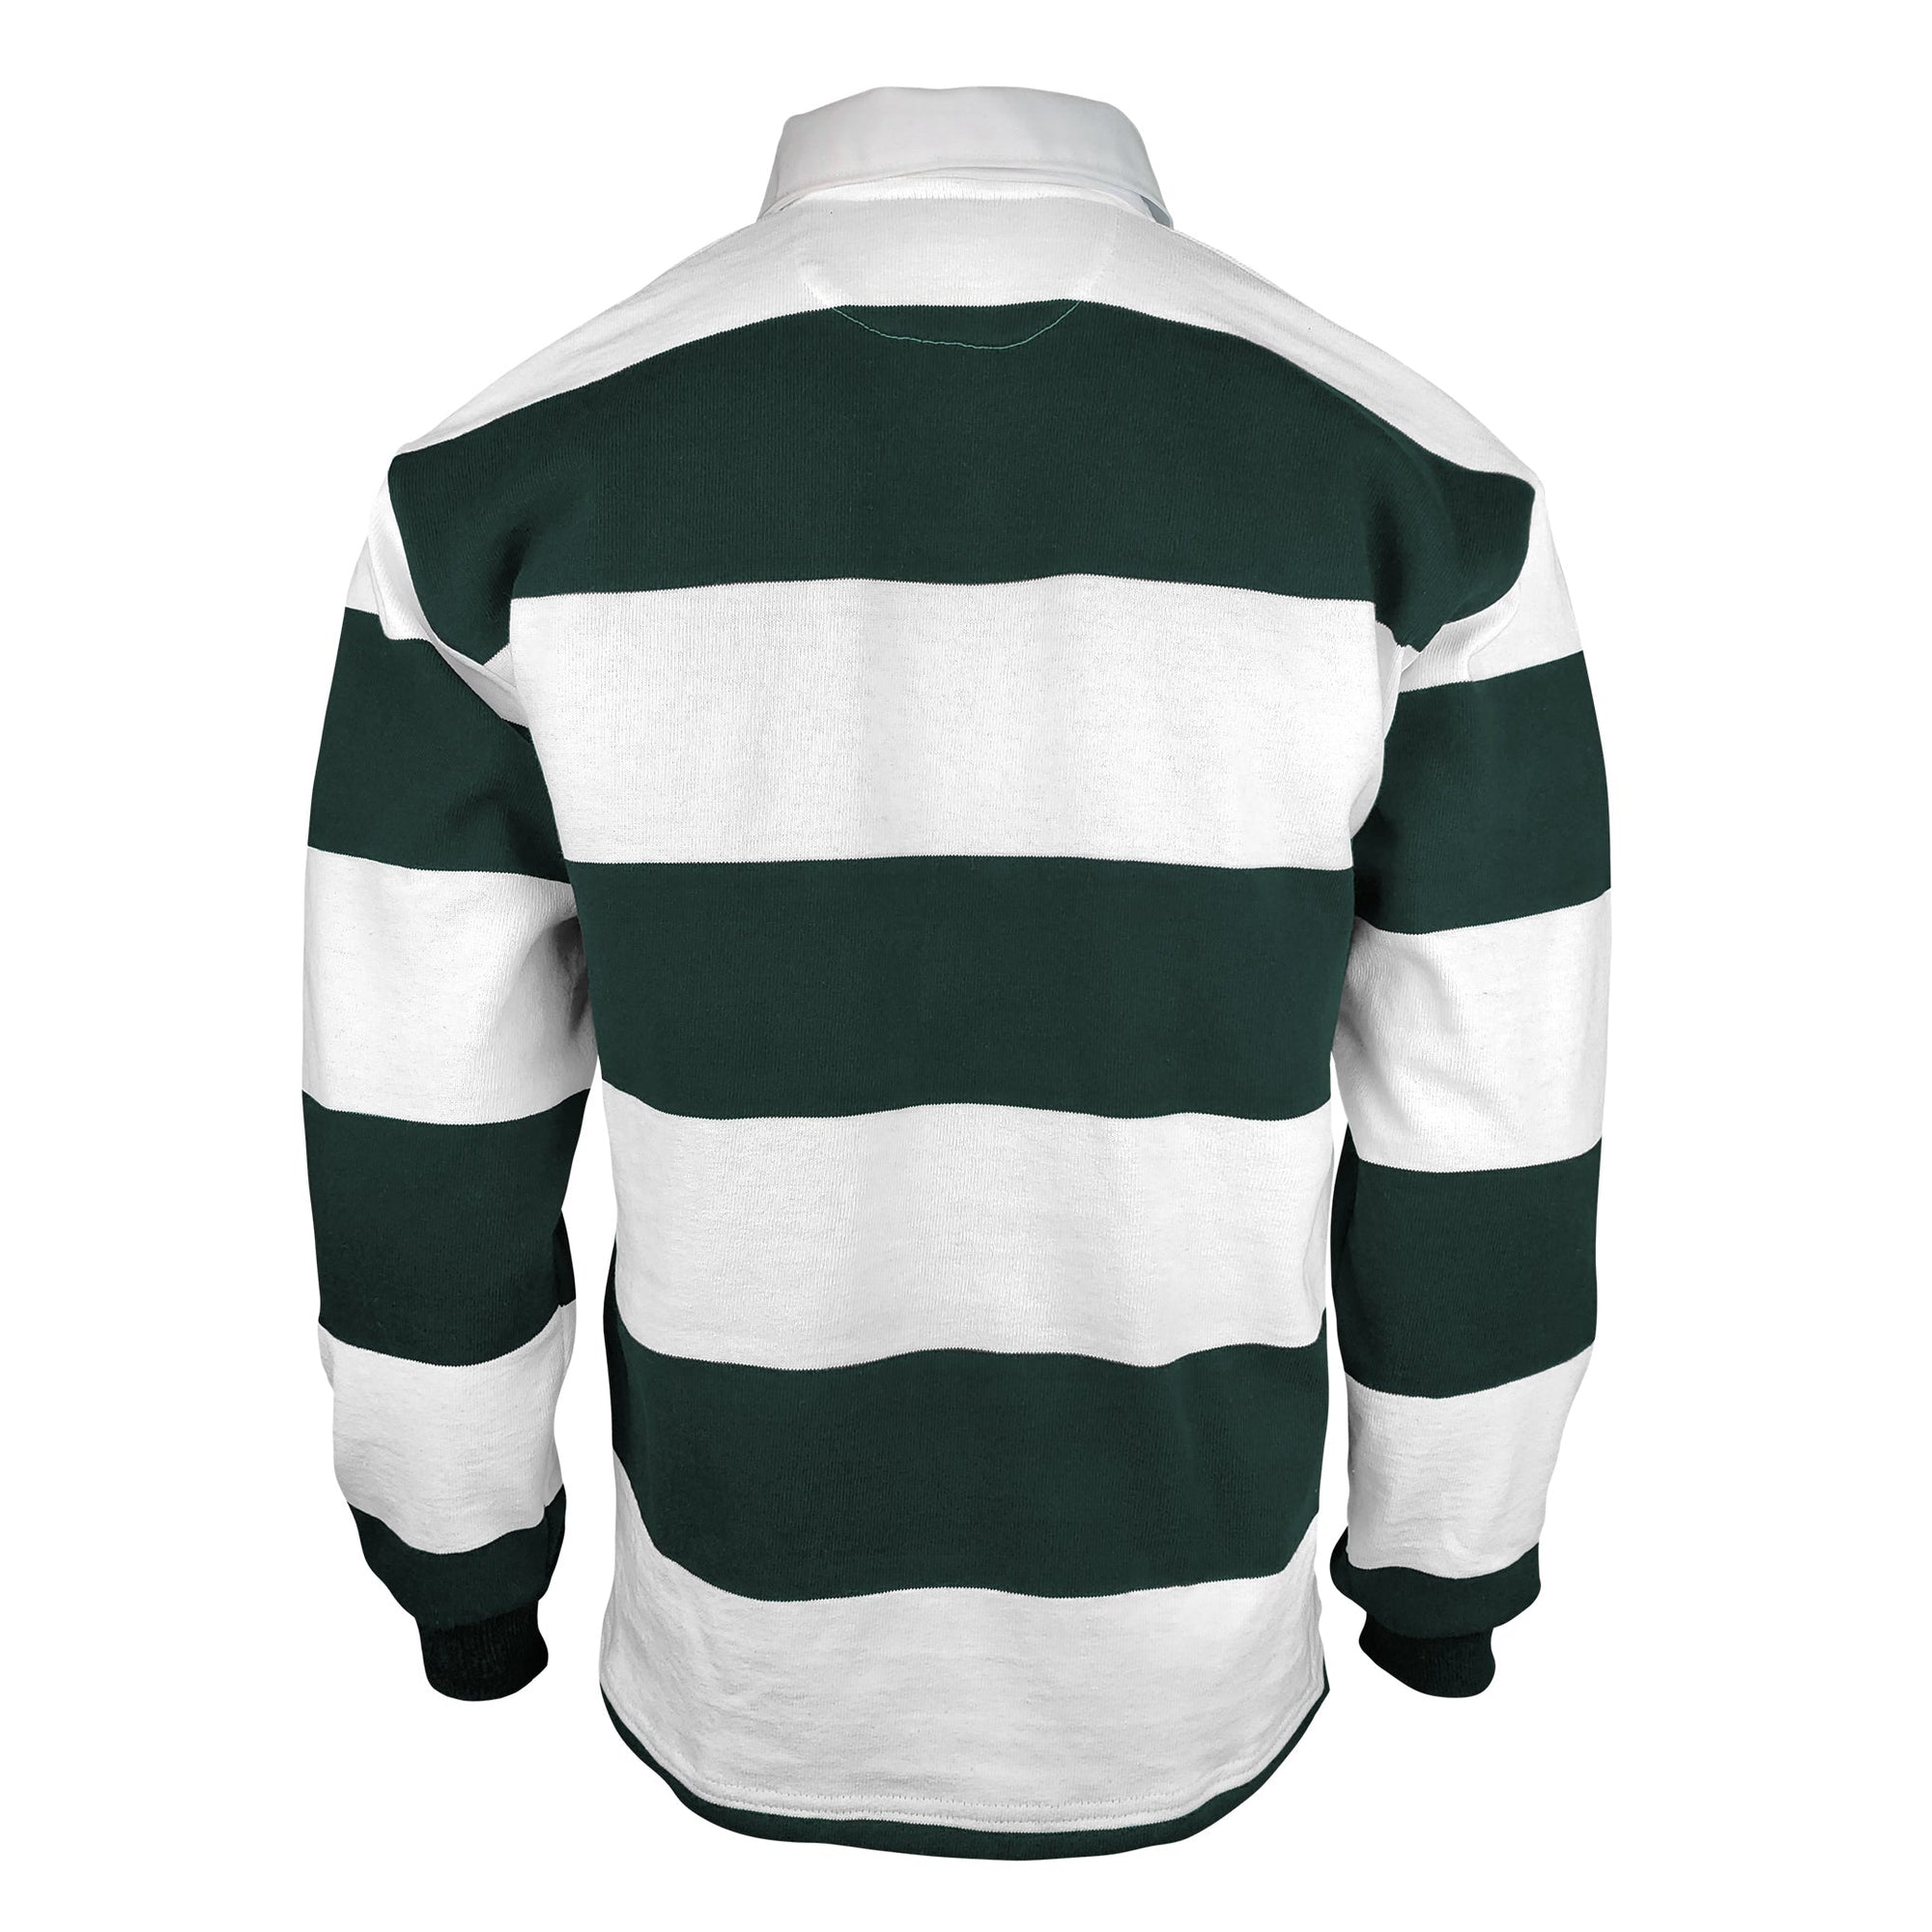 Rugby Imports SMRC Casual Weight Stripe Jersey